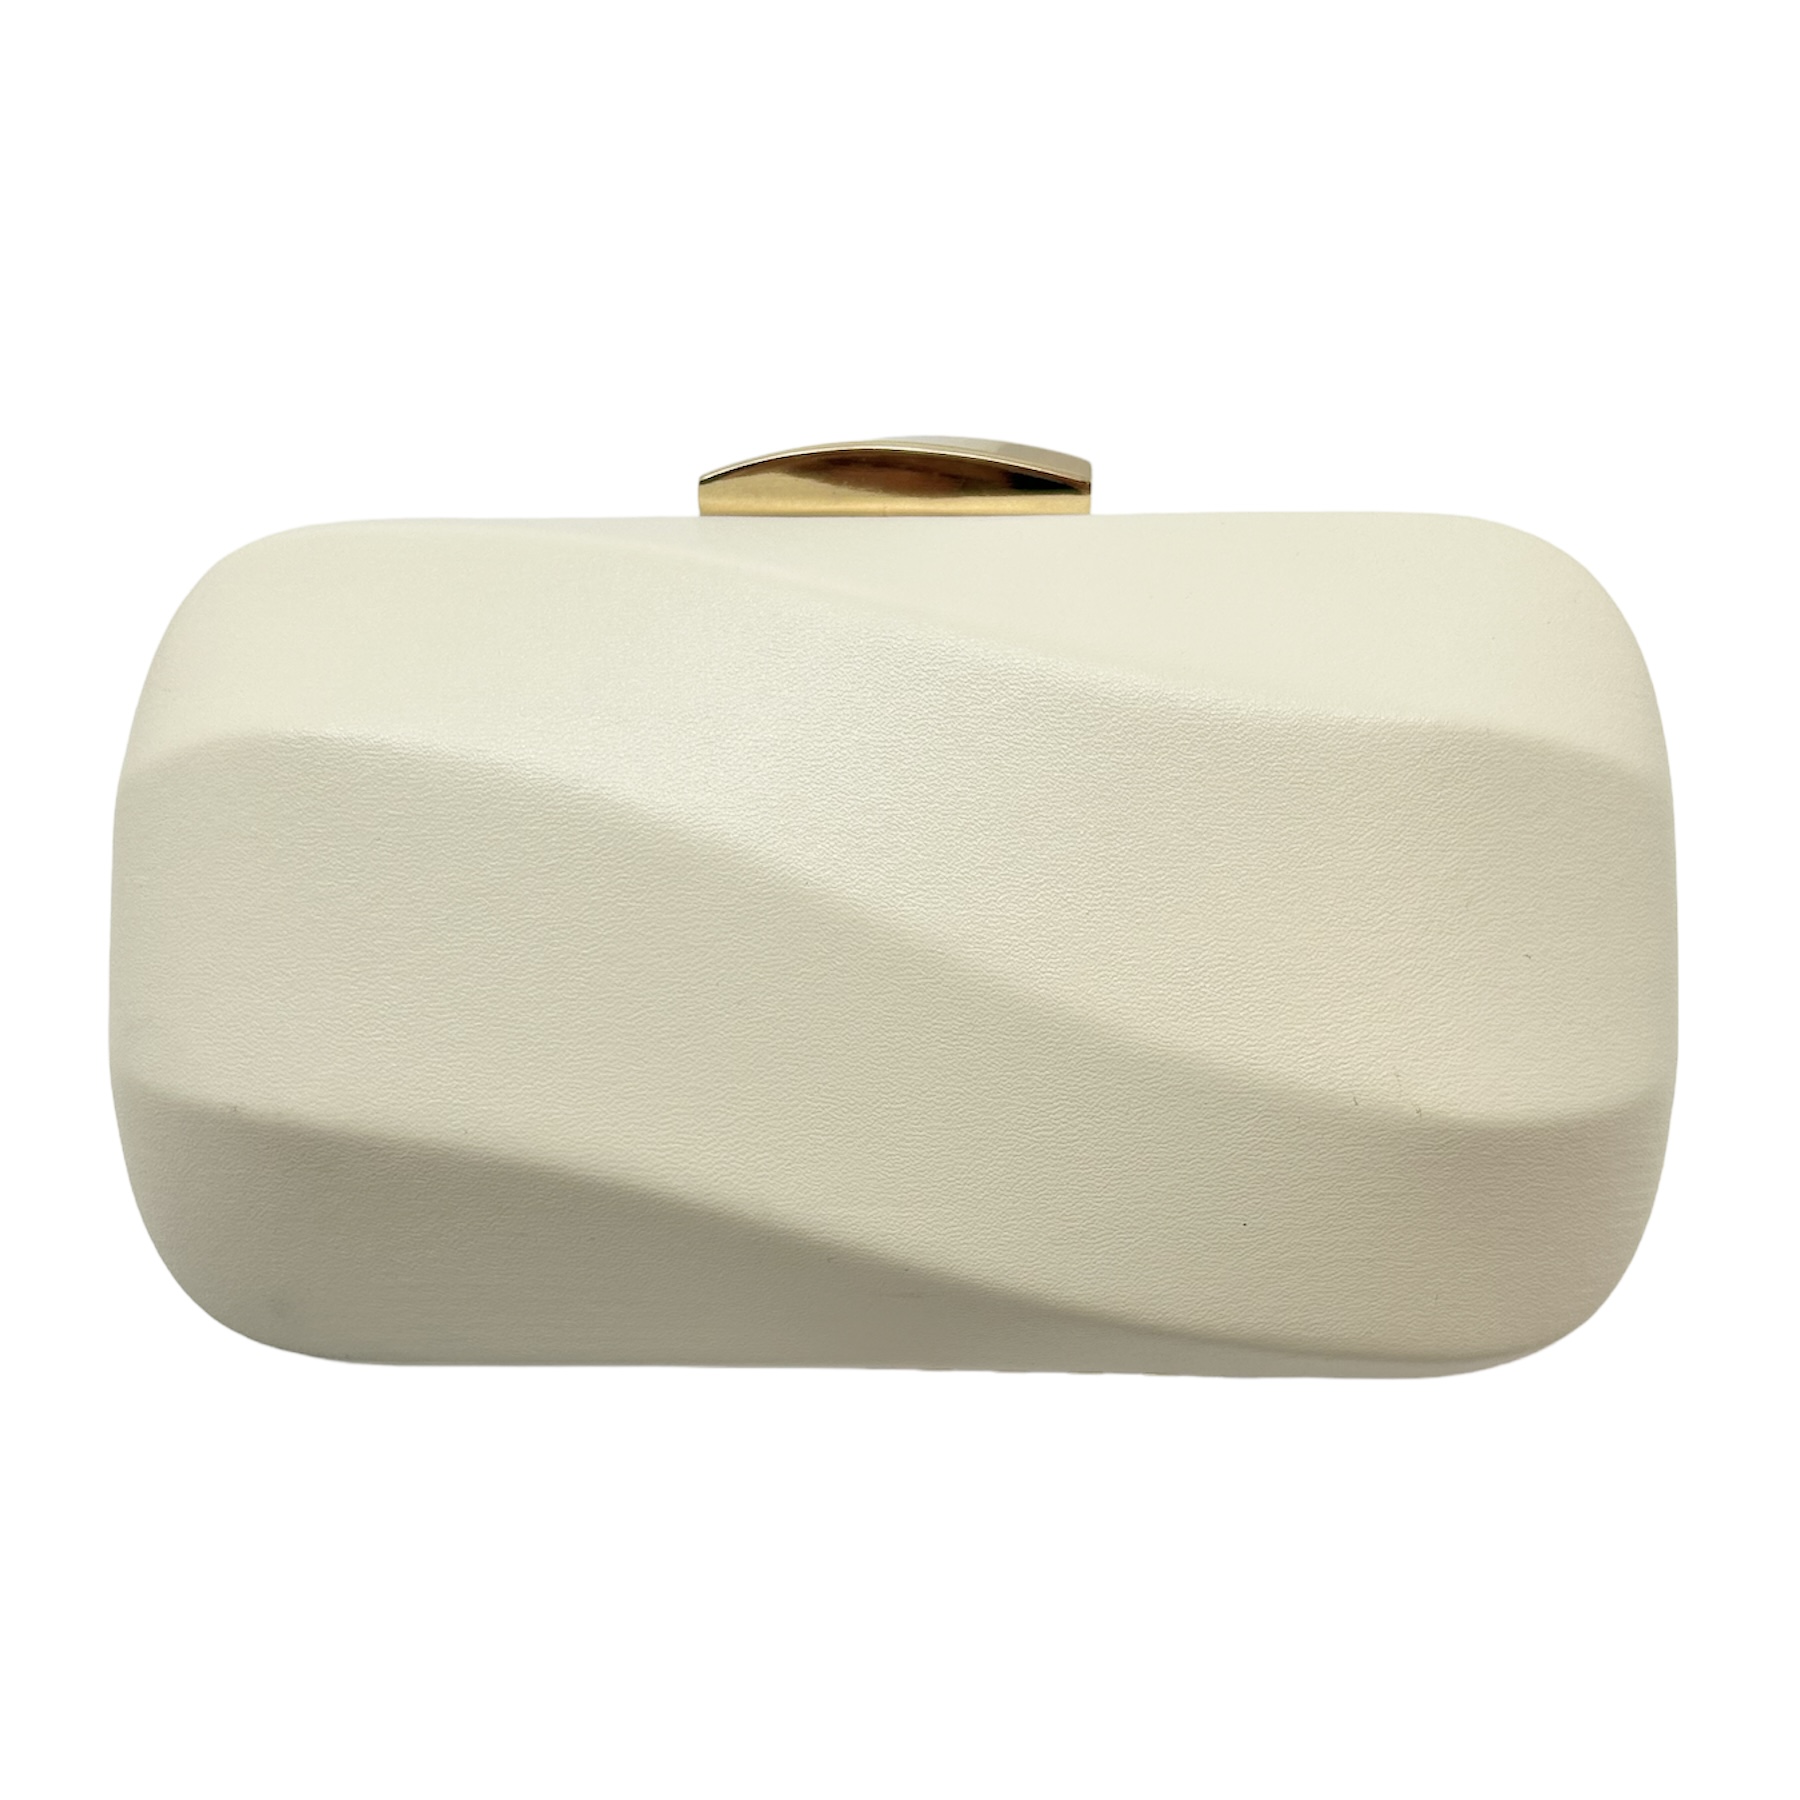 Ivory Clutch Bridal|Hilary|Jeanette Maree|Shop Online Now